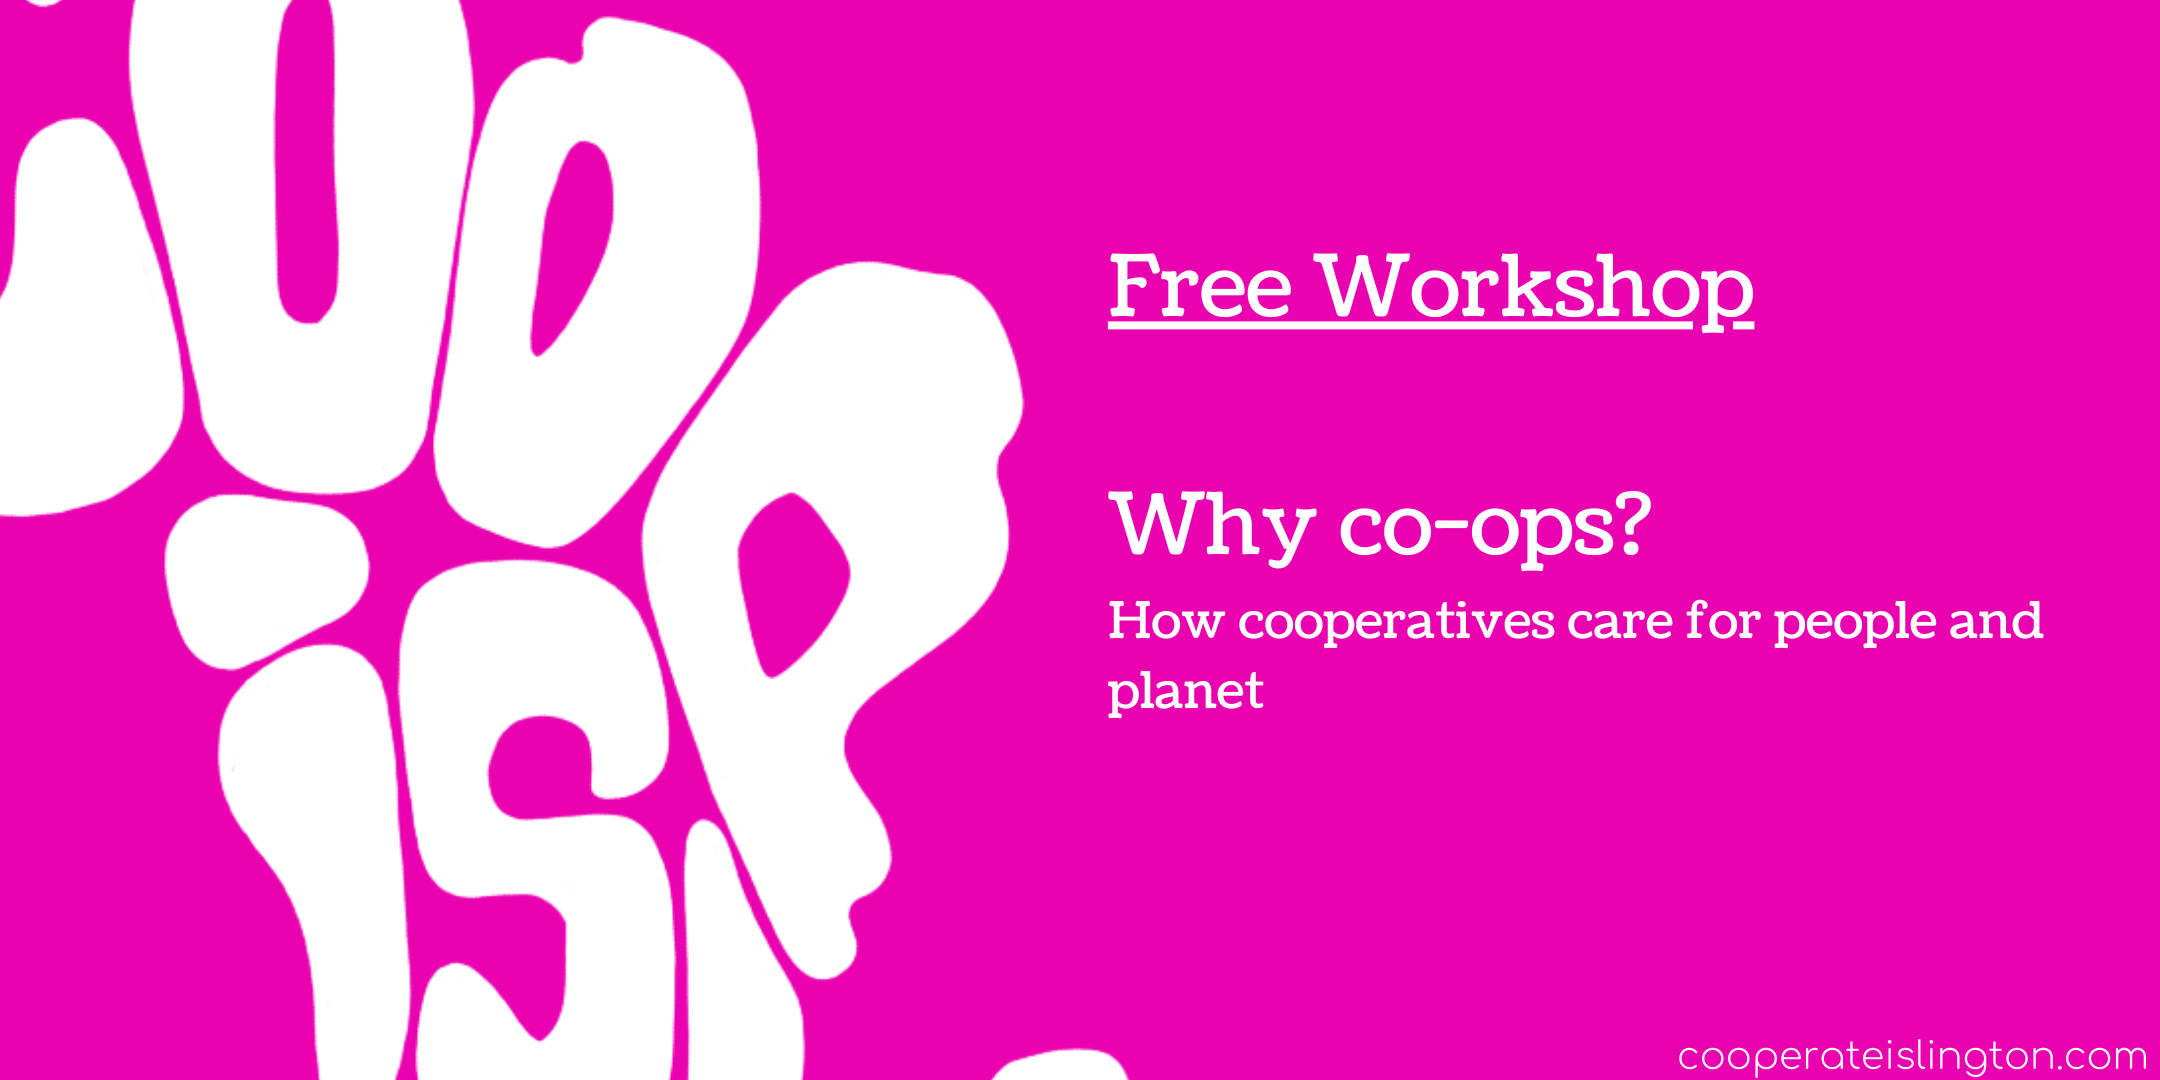 Why Co-ops? How Cooperatives care for people and planet